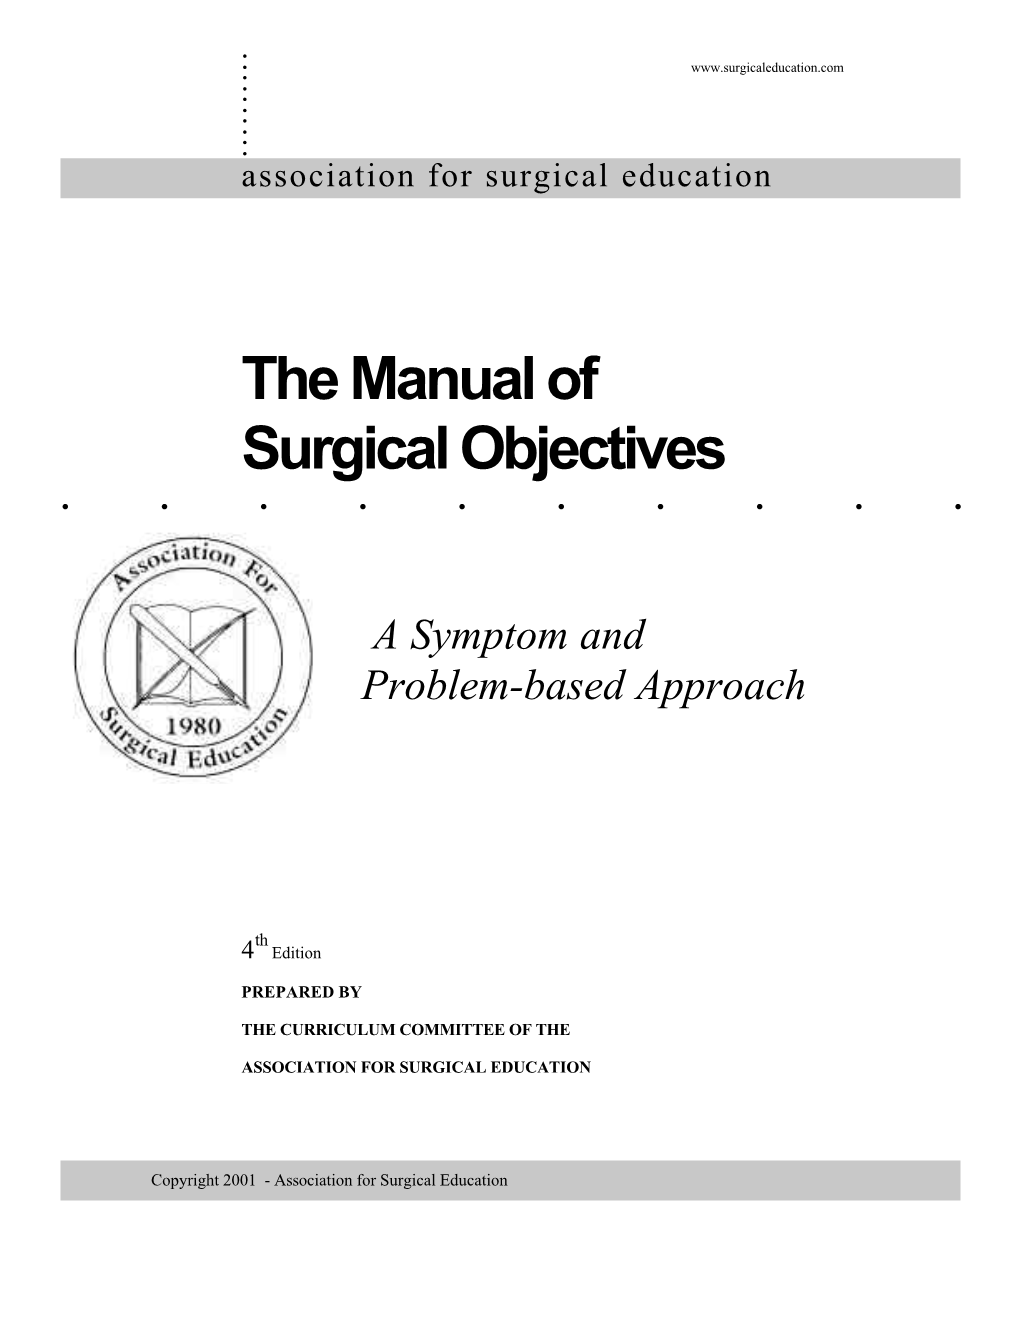 The Manual of Surgical Objectives